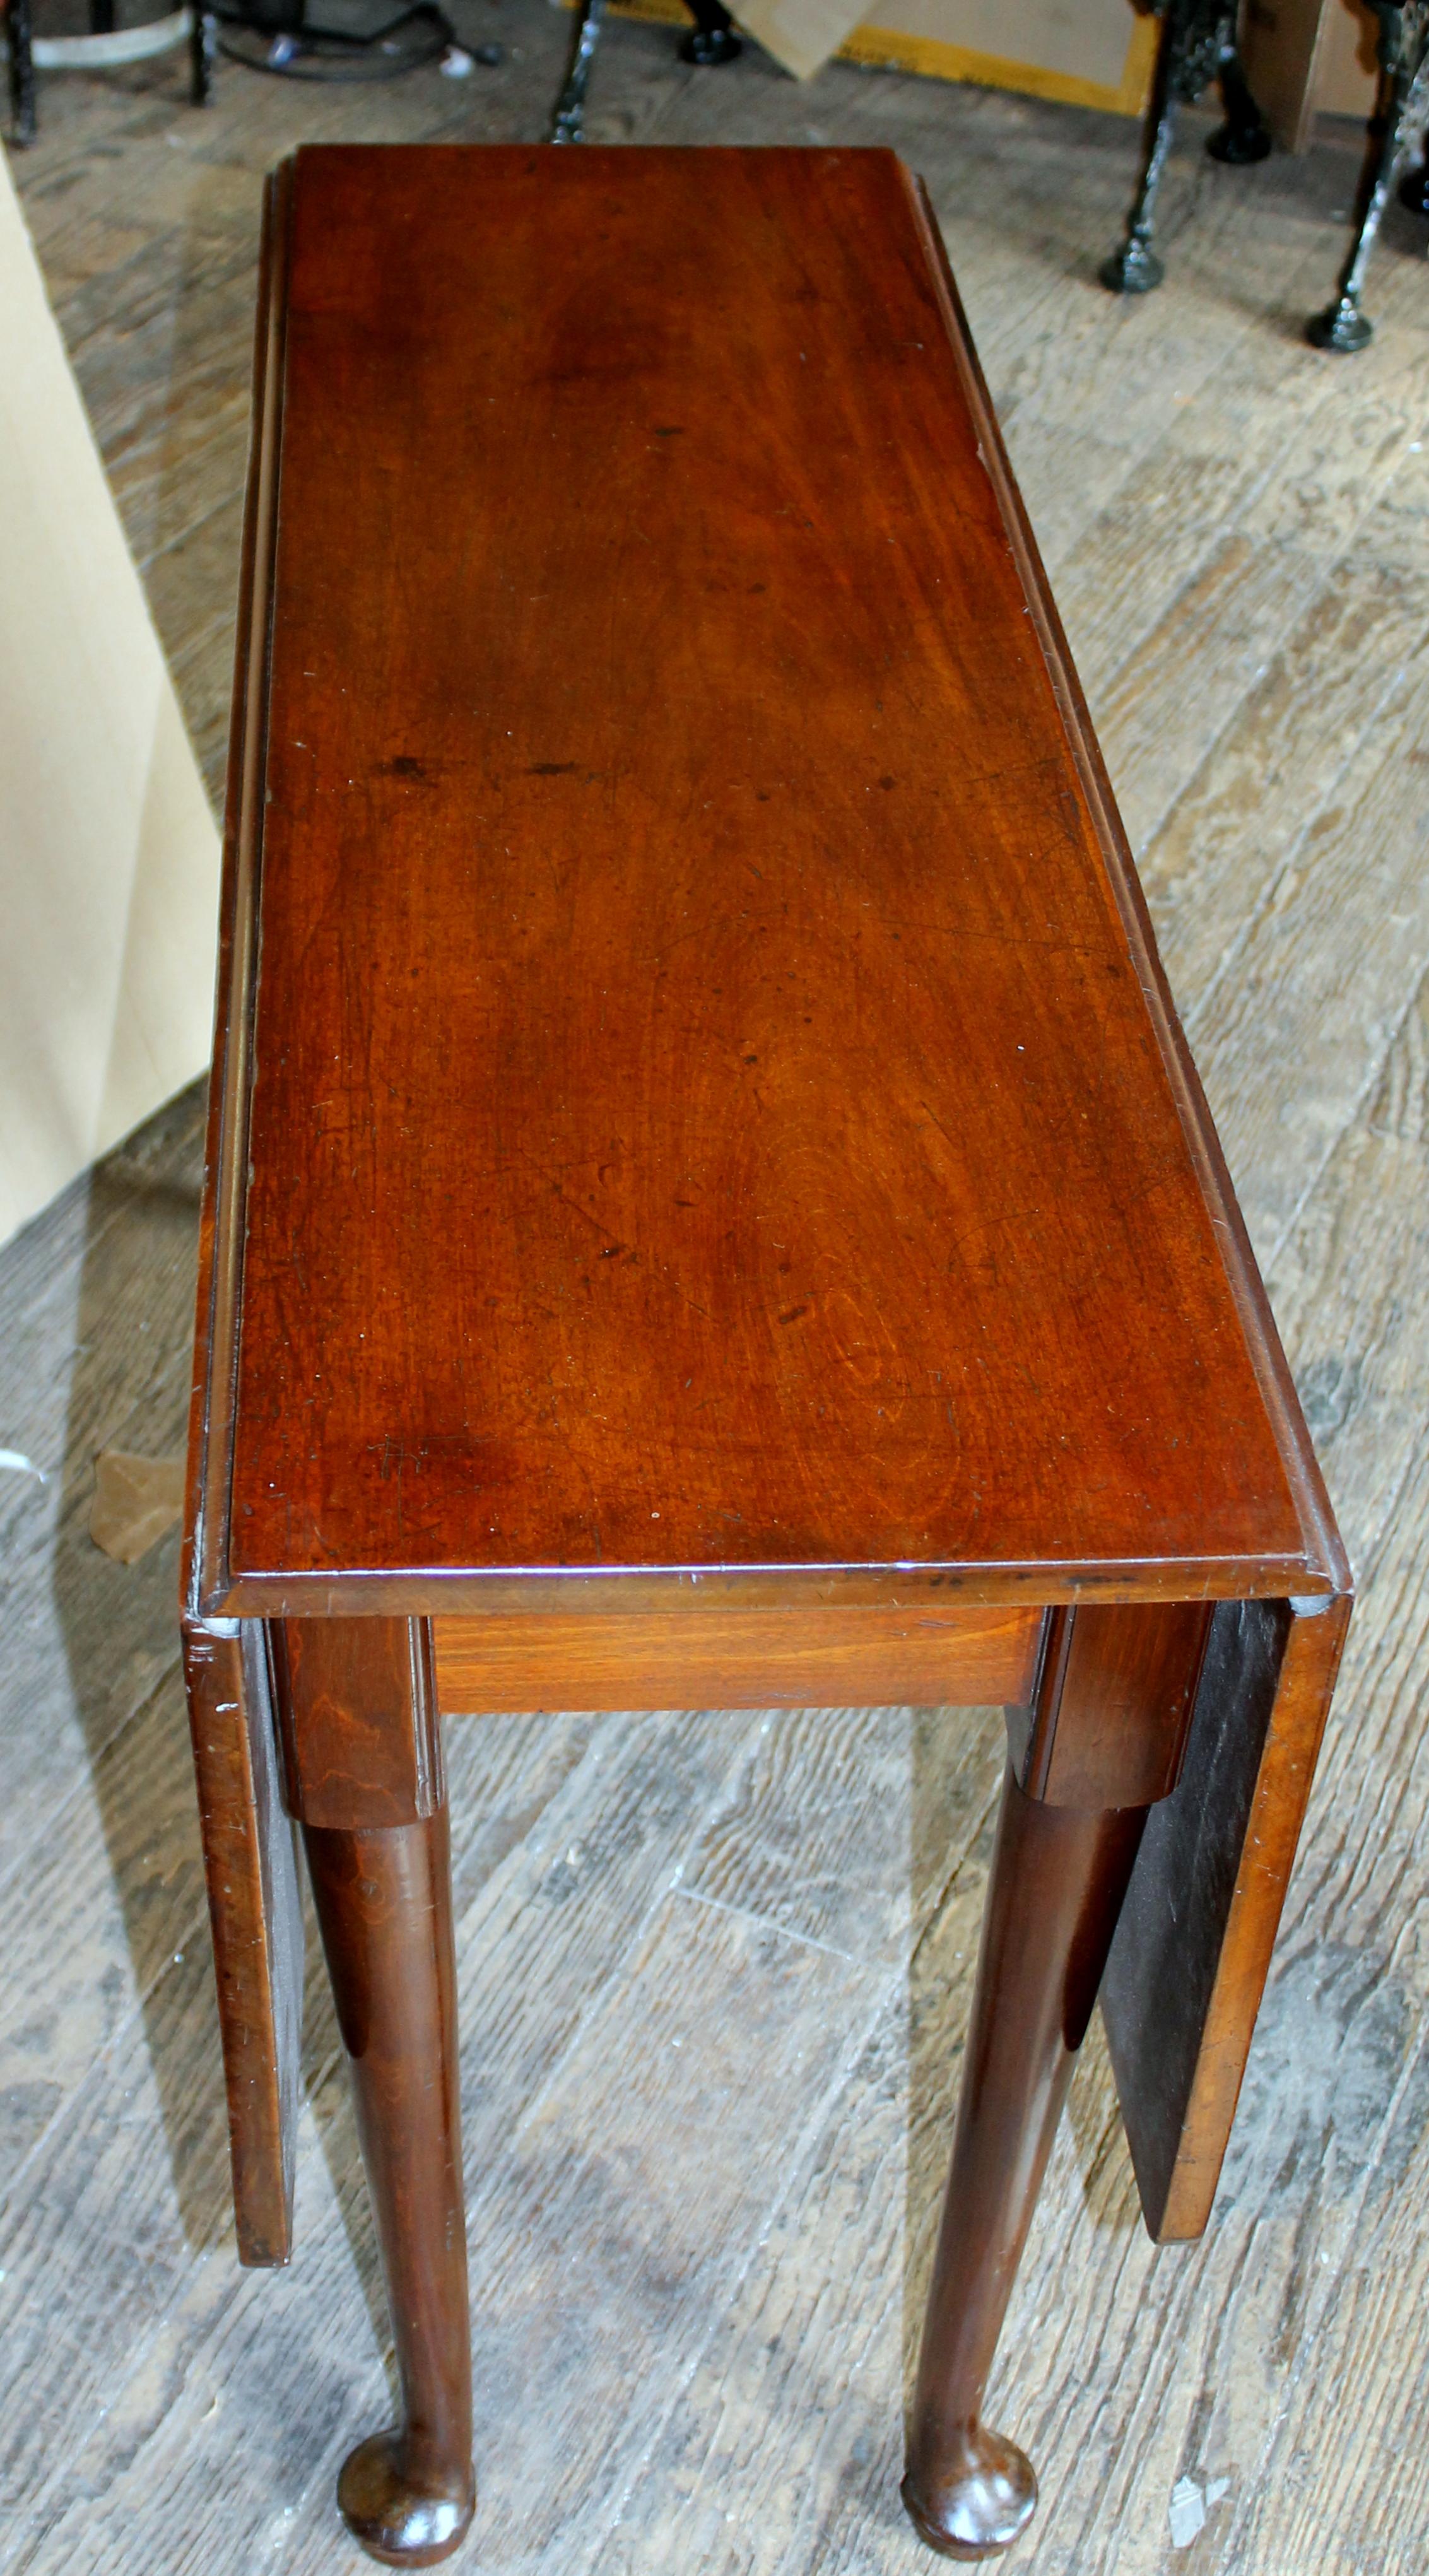 18th Century Antique American Federal Period Solid Mahogany Queen Anne Style Drop-Leaf Table